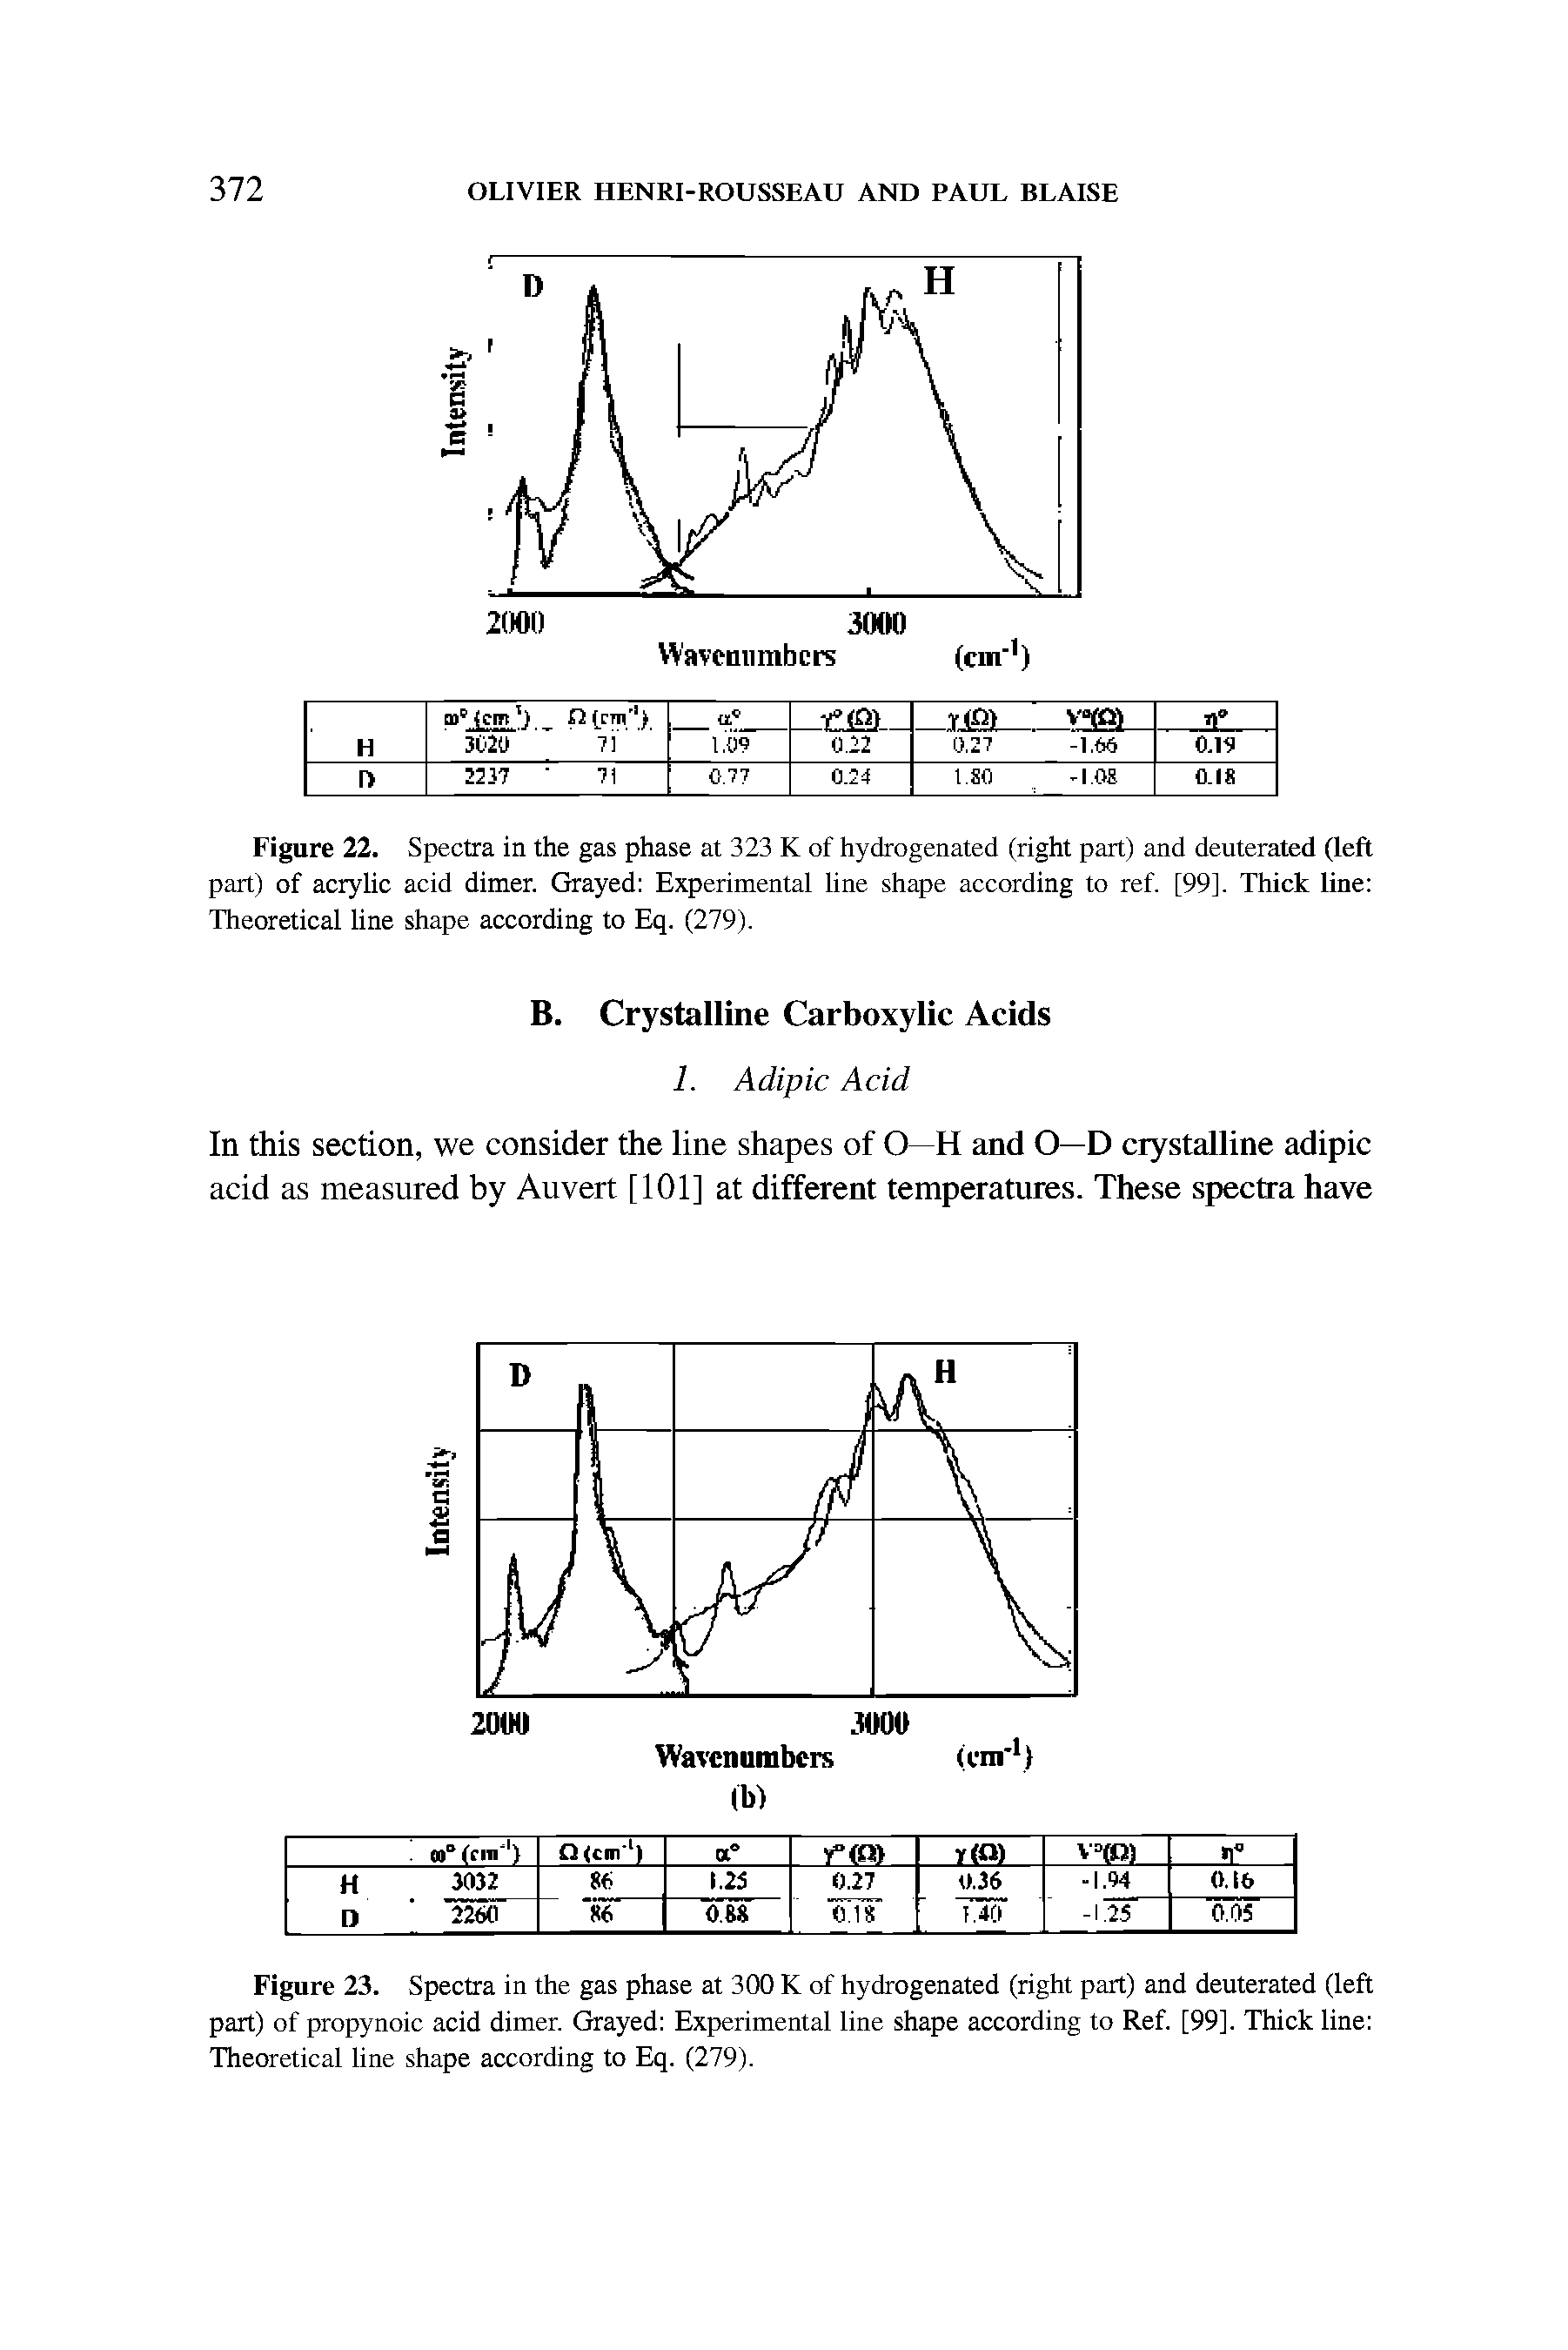 Figure 22. Spectra in the gas phase at 323 K of hydrogenated (right part) and deuterated (left part) of acrylic acid dimer. Grayed Experimental line shape according to ref. [99]. Thick line Theoretical line shape according to Eq. (279).